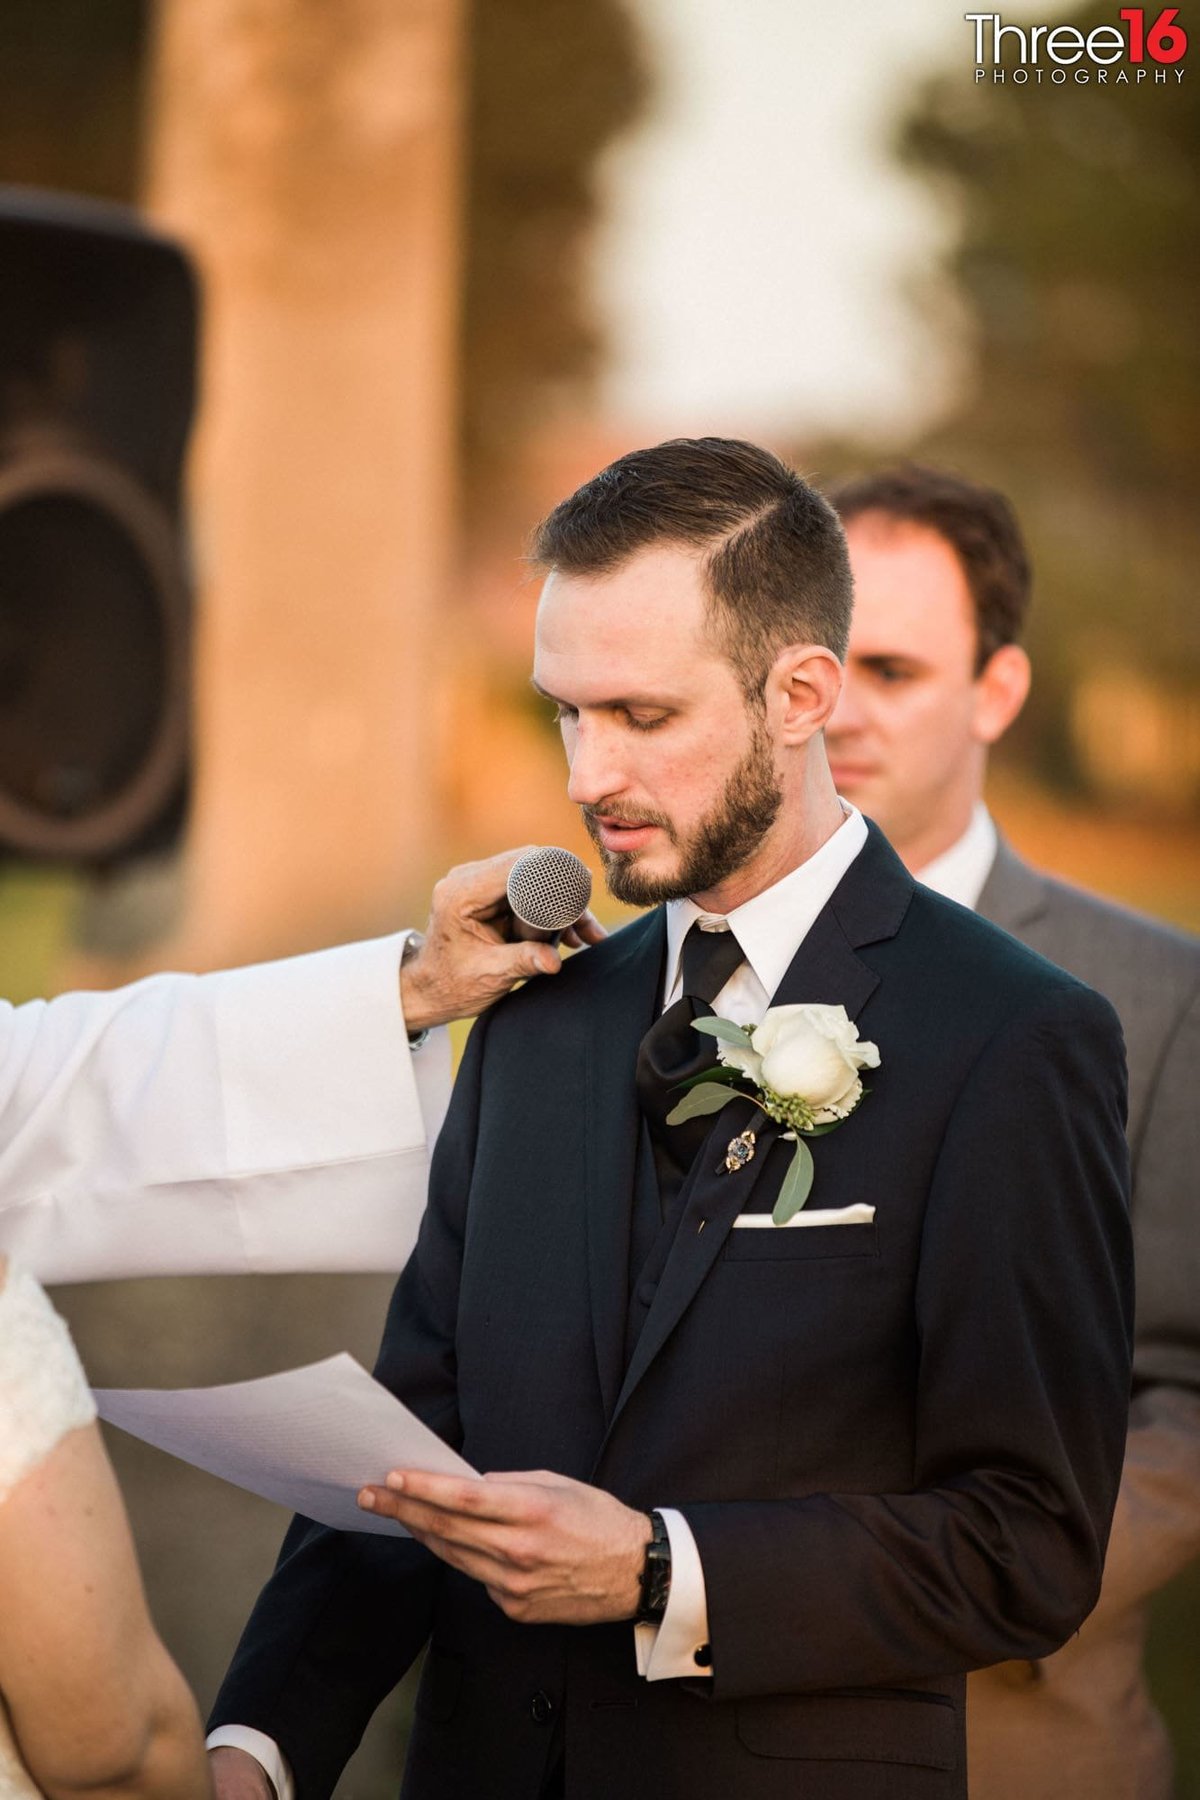 Groom reads his vows to his Bride during the ceremony